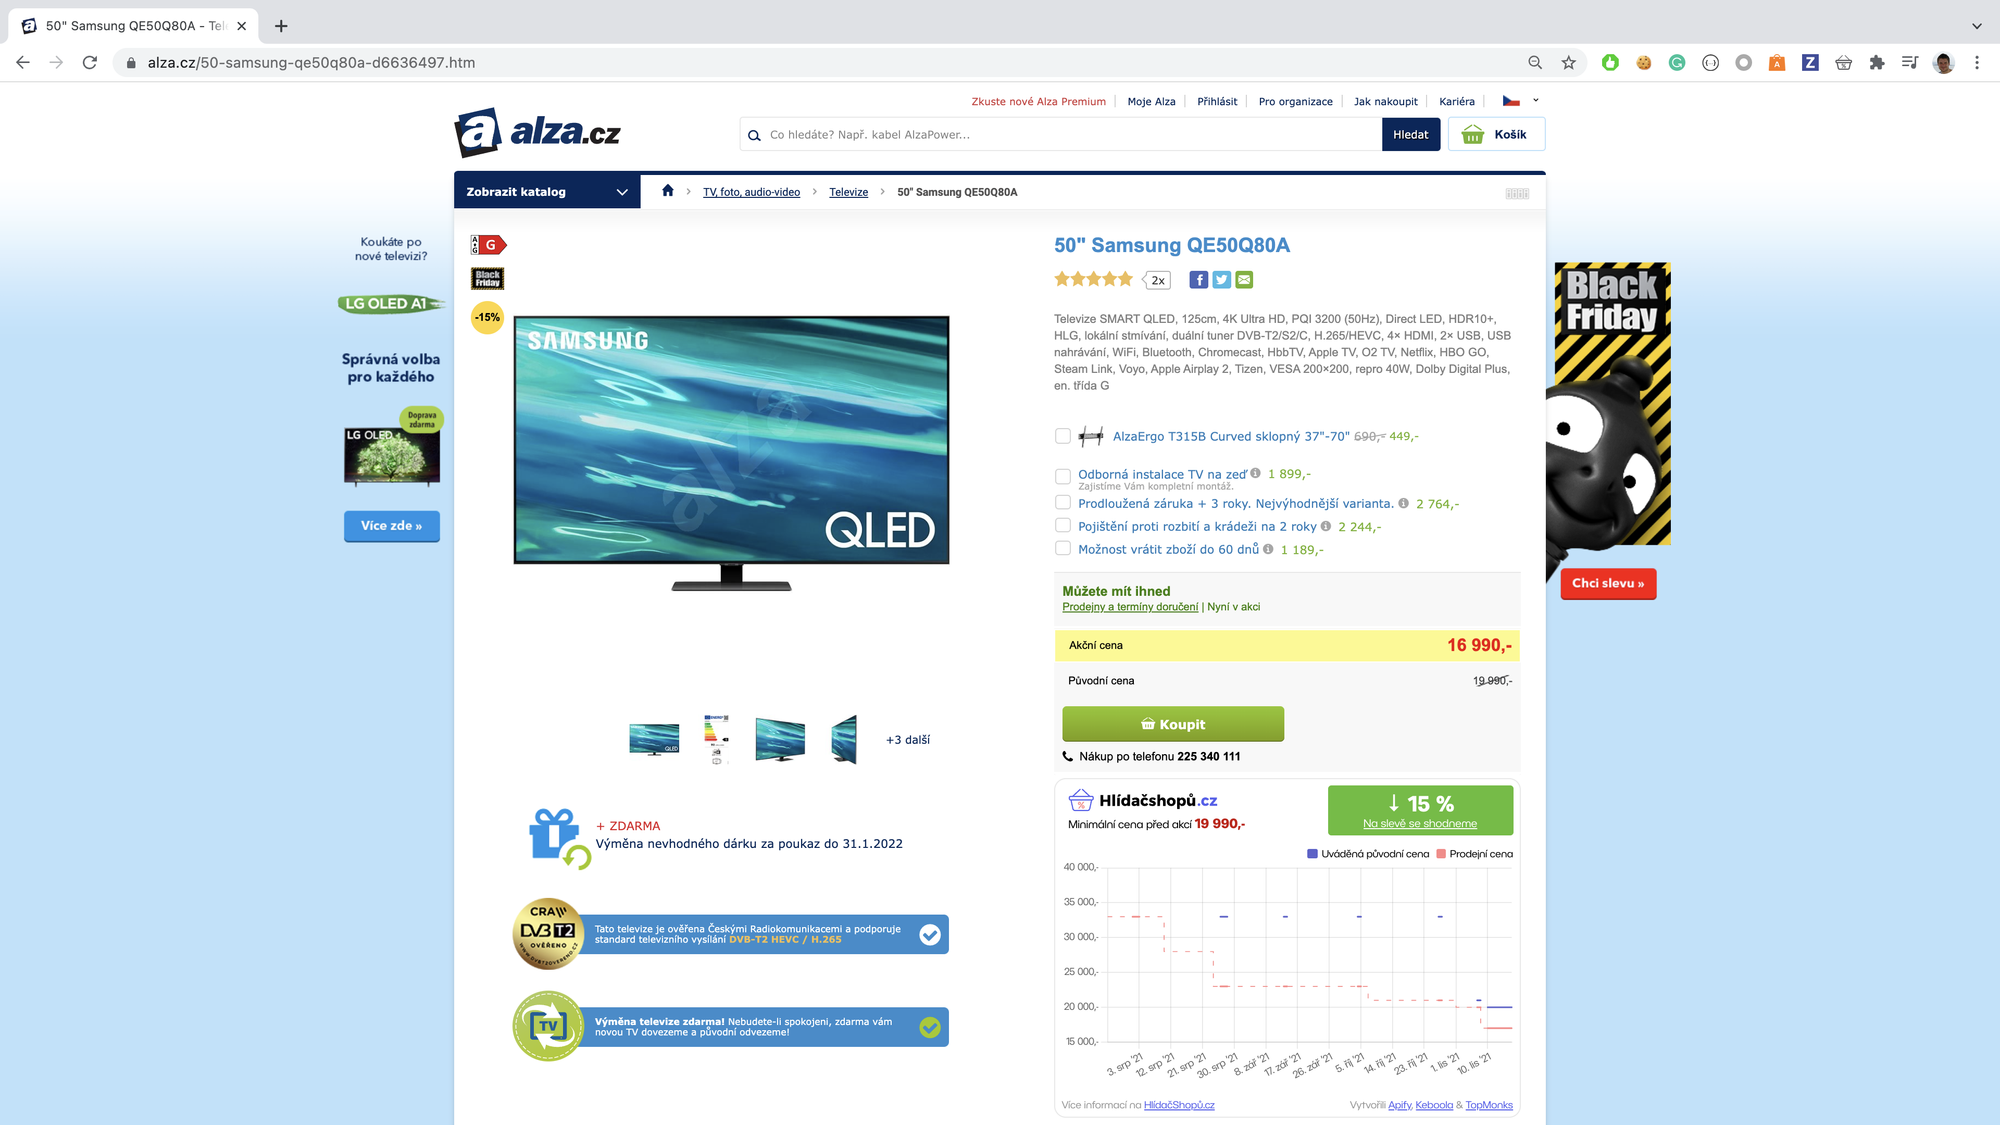 screenshot of a TV on sale at alza.cz from 19,990 CZK to 16,990 CZK